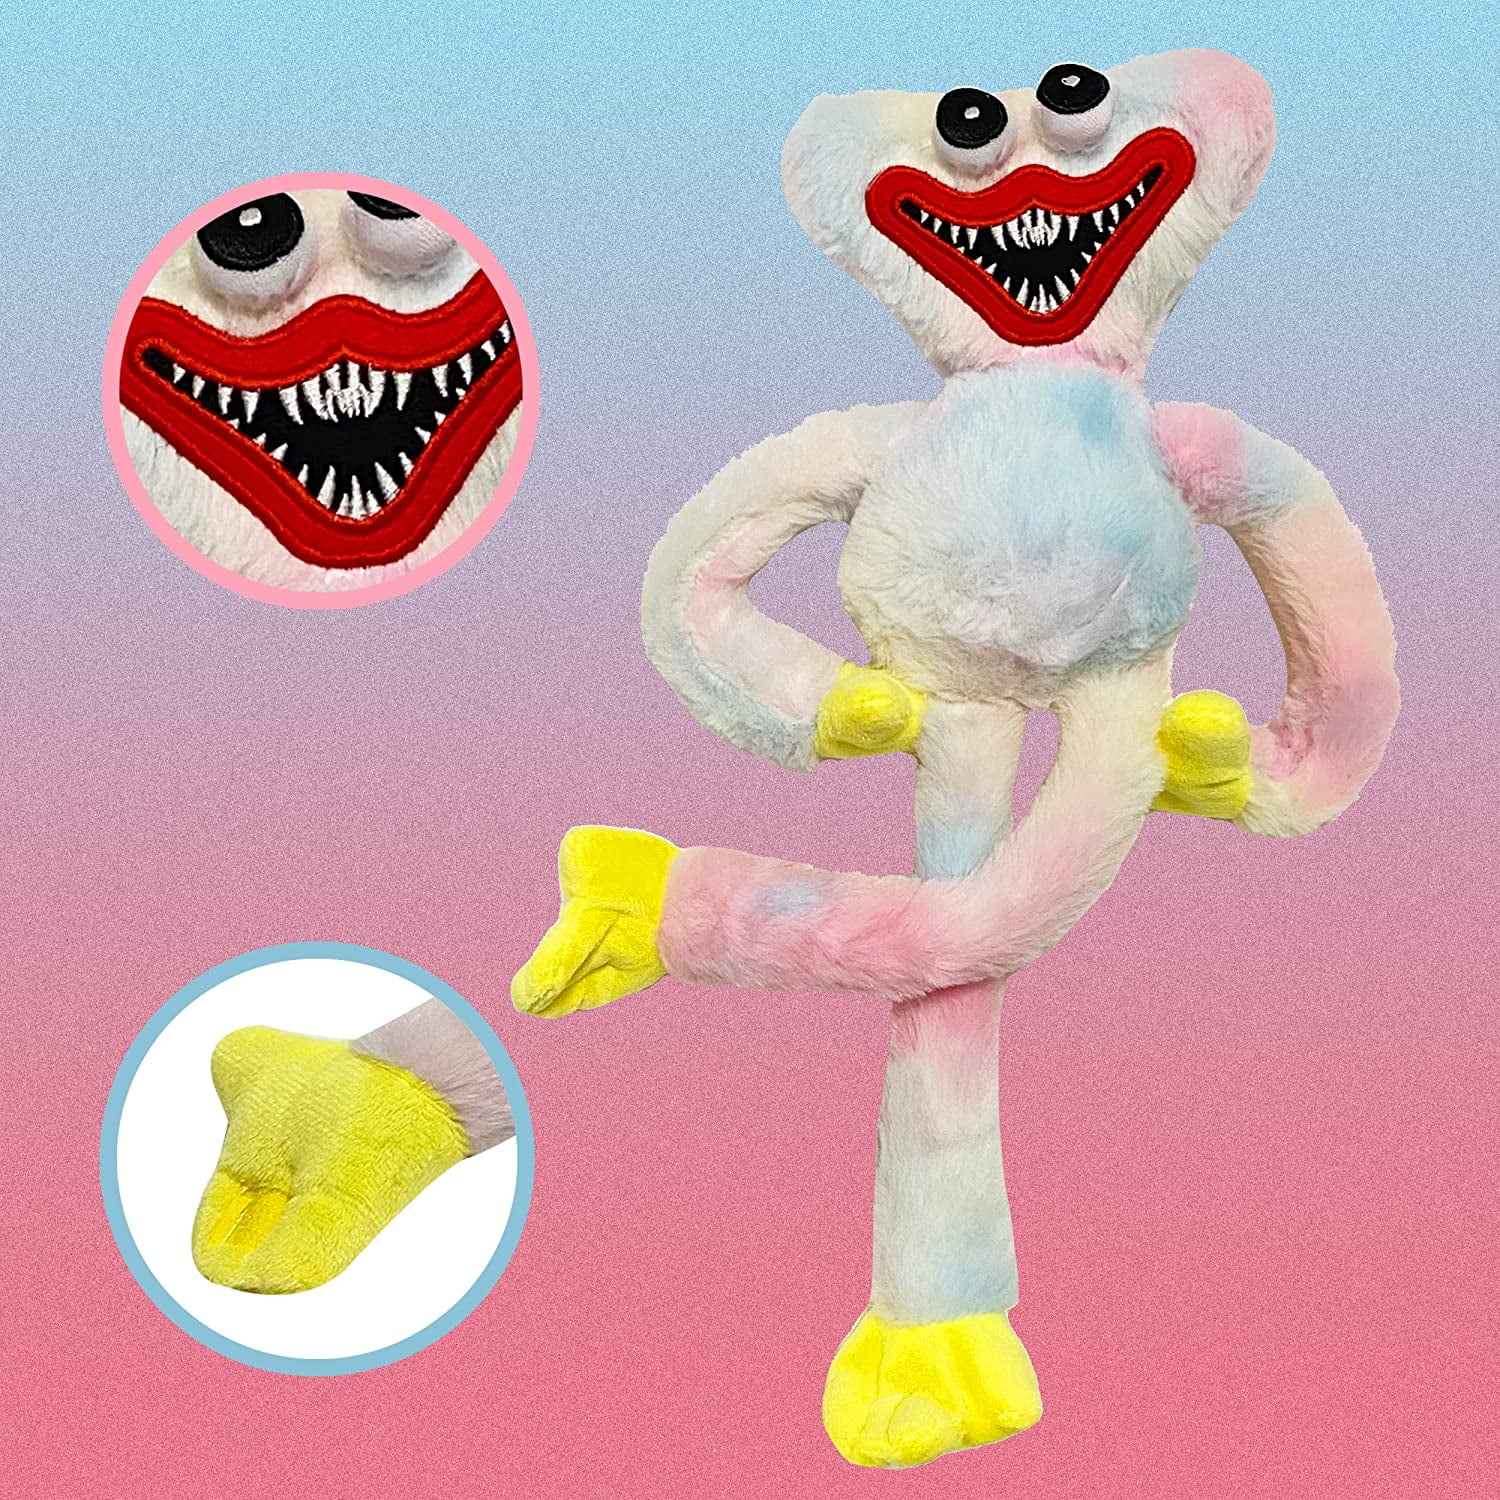 Mega Derp Monster Sculpture Air Dry Clay Art Toy Art Doll Funny